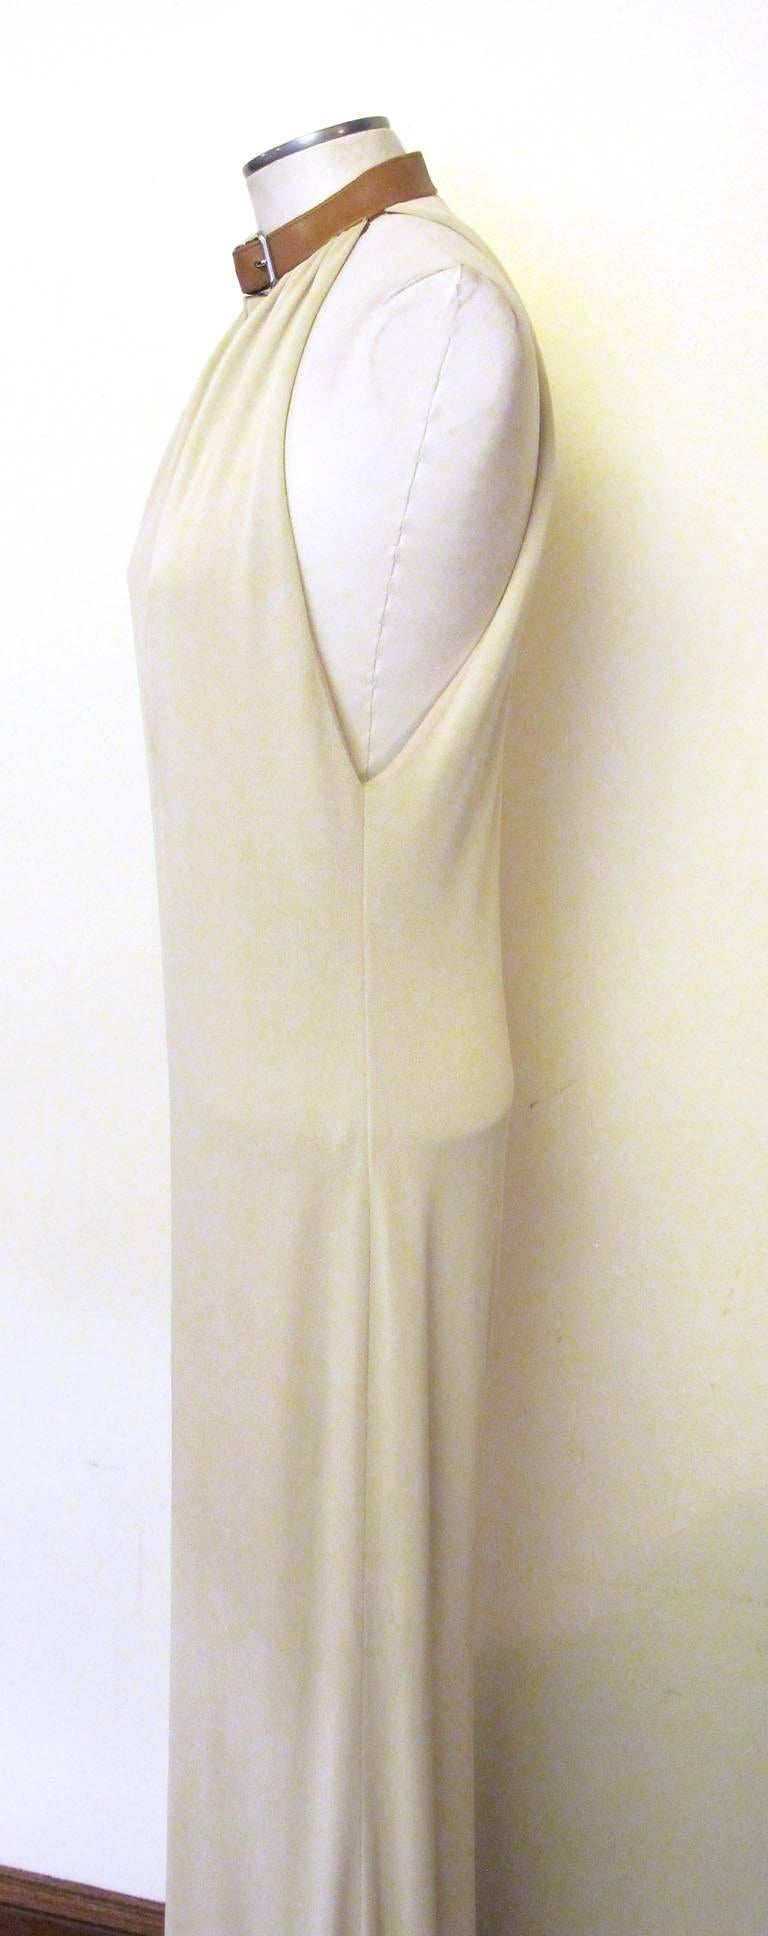 Ralph Lauren Collection Sheath Dress with Leather Collar In New Condition For Sale In San Francisco, CA